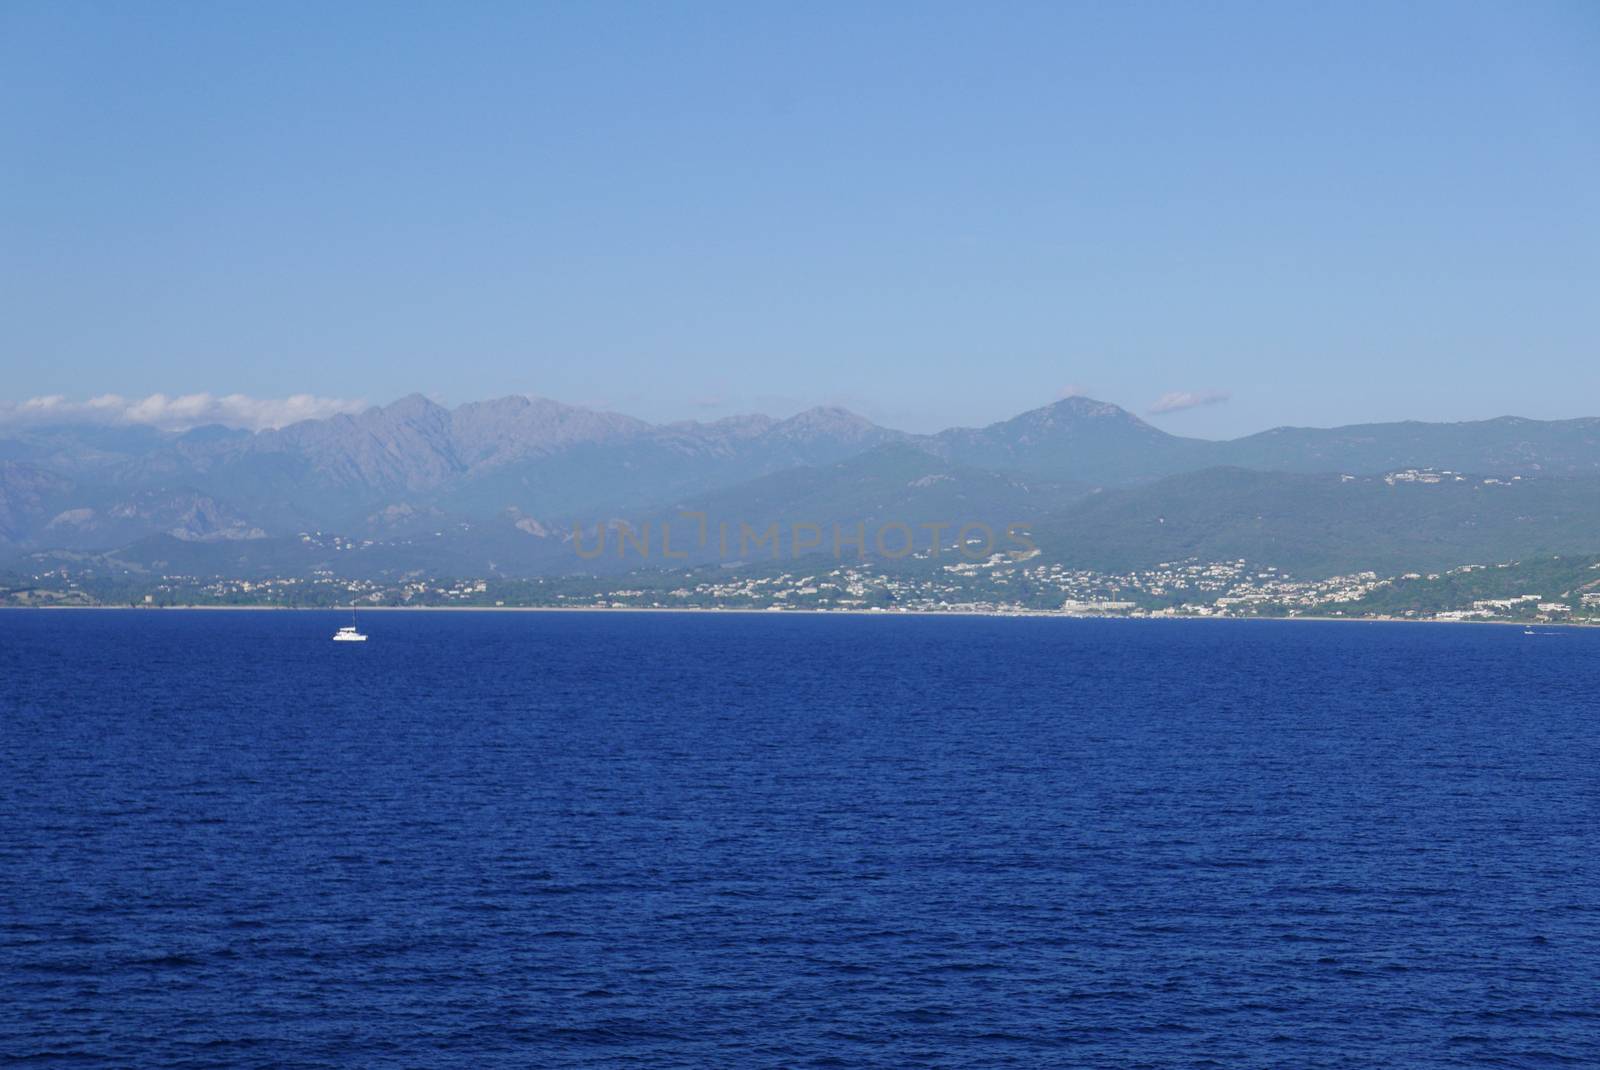 Holidays in southern Corsica.
Discovery of the Sanguinaires Islands, next to the city of Ajaccio